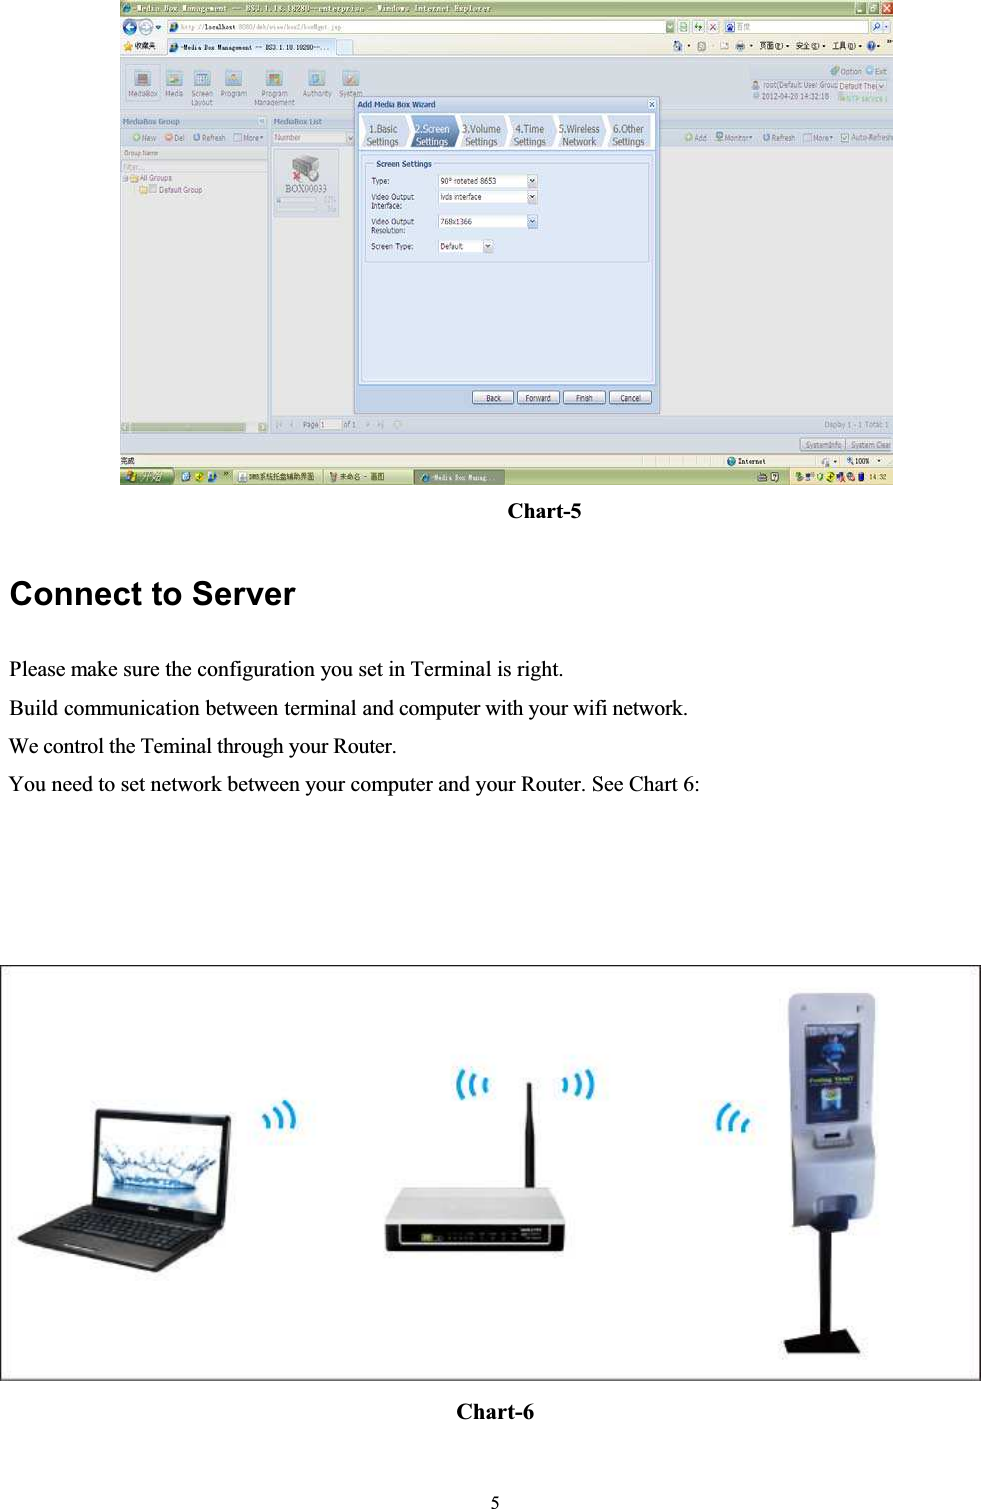 5Chart-5Connect to ServerPlease make sure the configuration you set in Terminal is right.Build communication between terminal and computer with your wifi network.We control the Teminal through your Router.You need to set network between your computer and your Router. See Chart 6: Chart-6